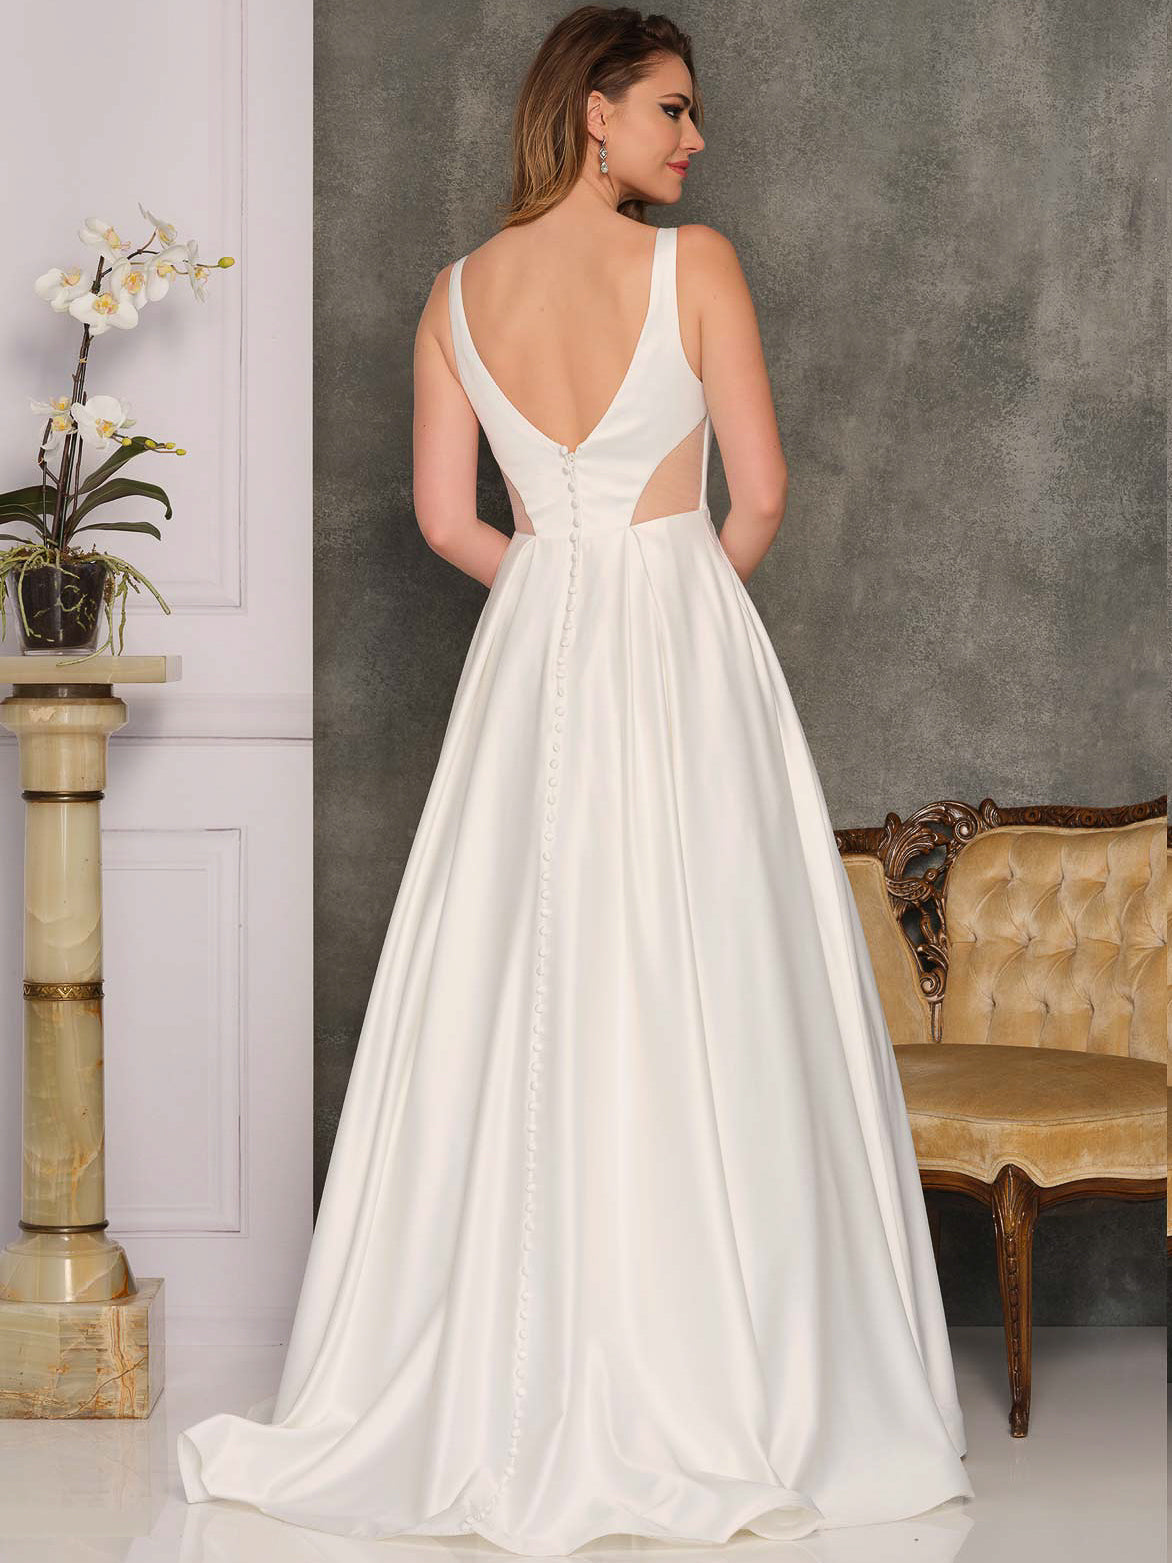 THICK STRAP CUT OUT SIDE WEDDING GOWN